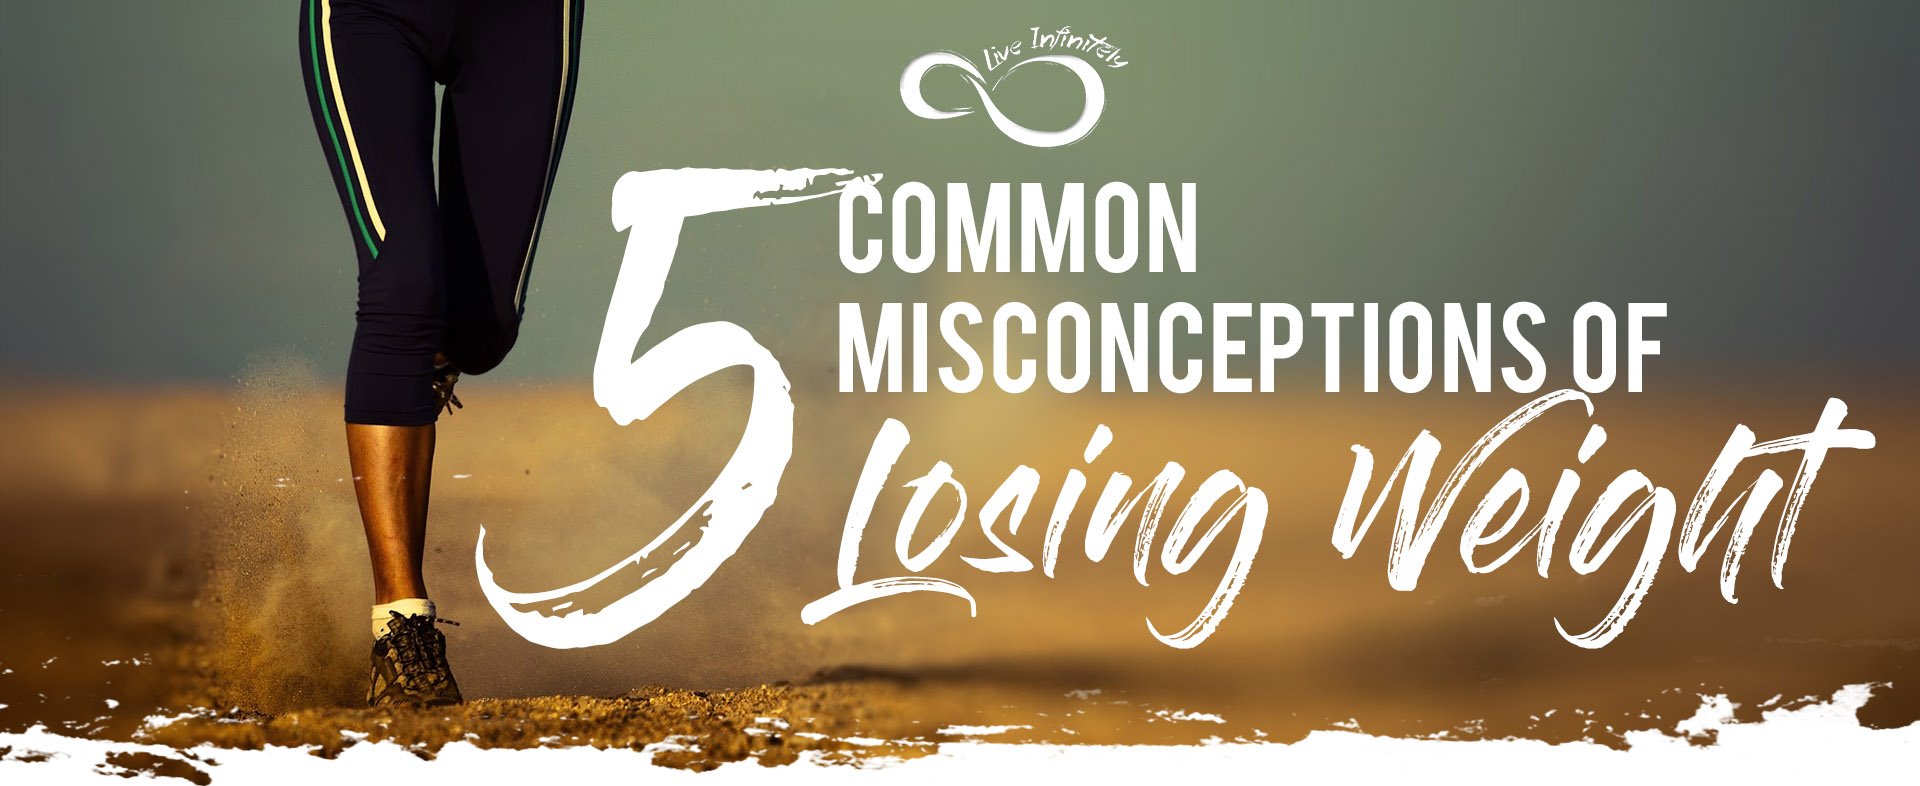 5 Common Misconceptions of Losing Weight